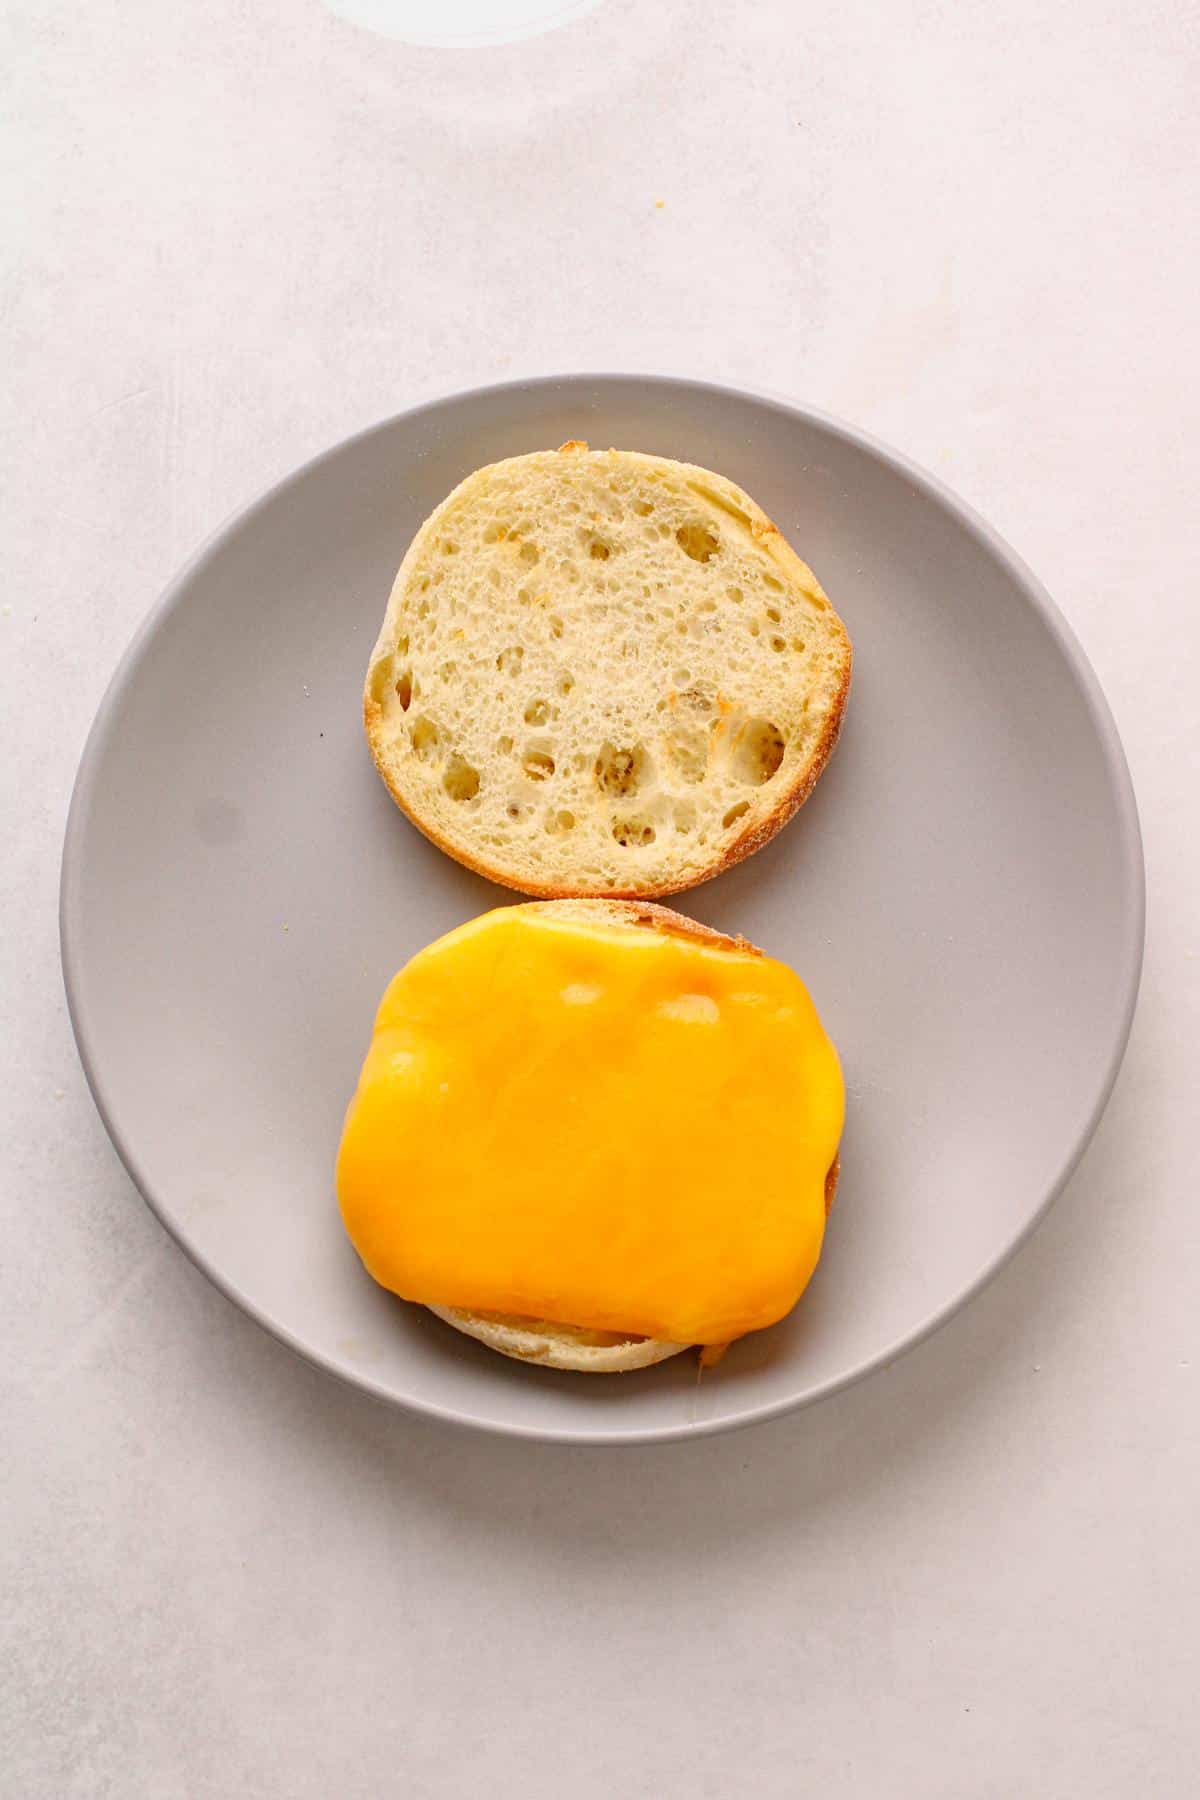 English muffin on plate with cheese on top.